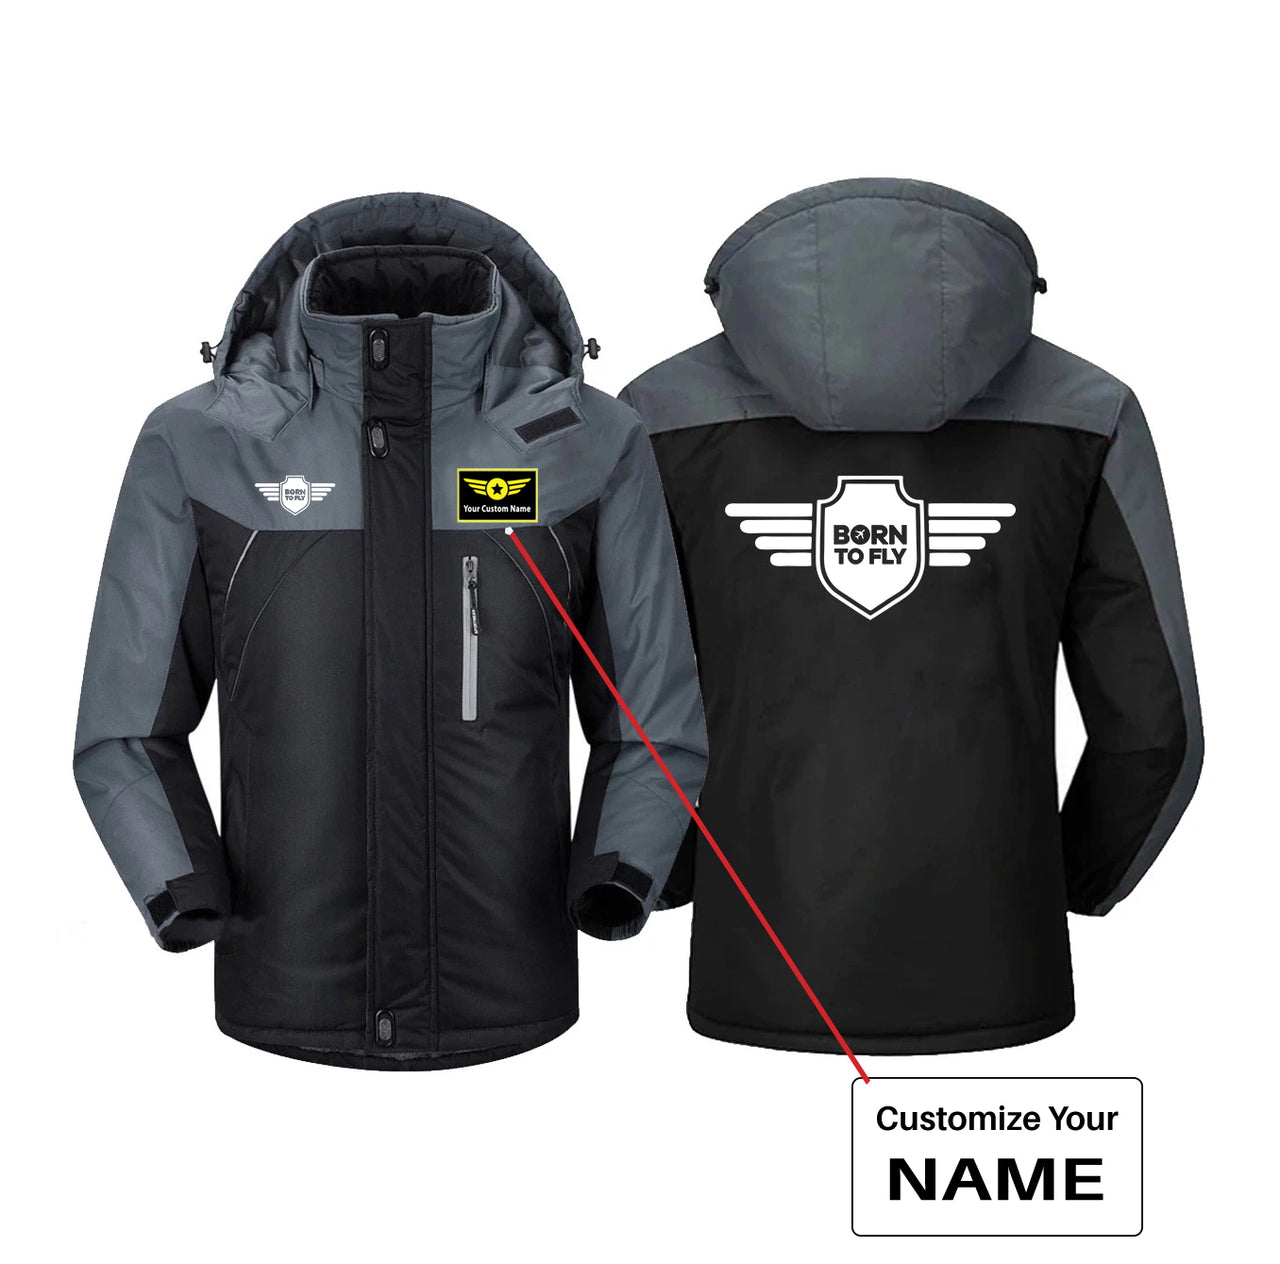 Born To Fly & Badge Designed Thick Winter Jackets